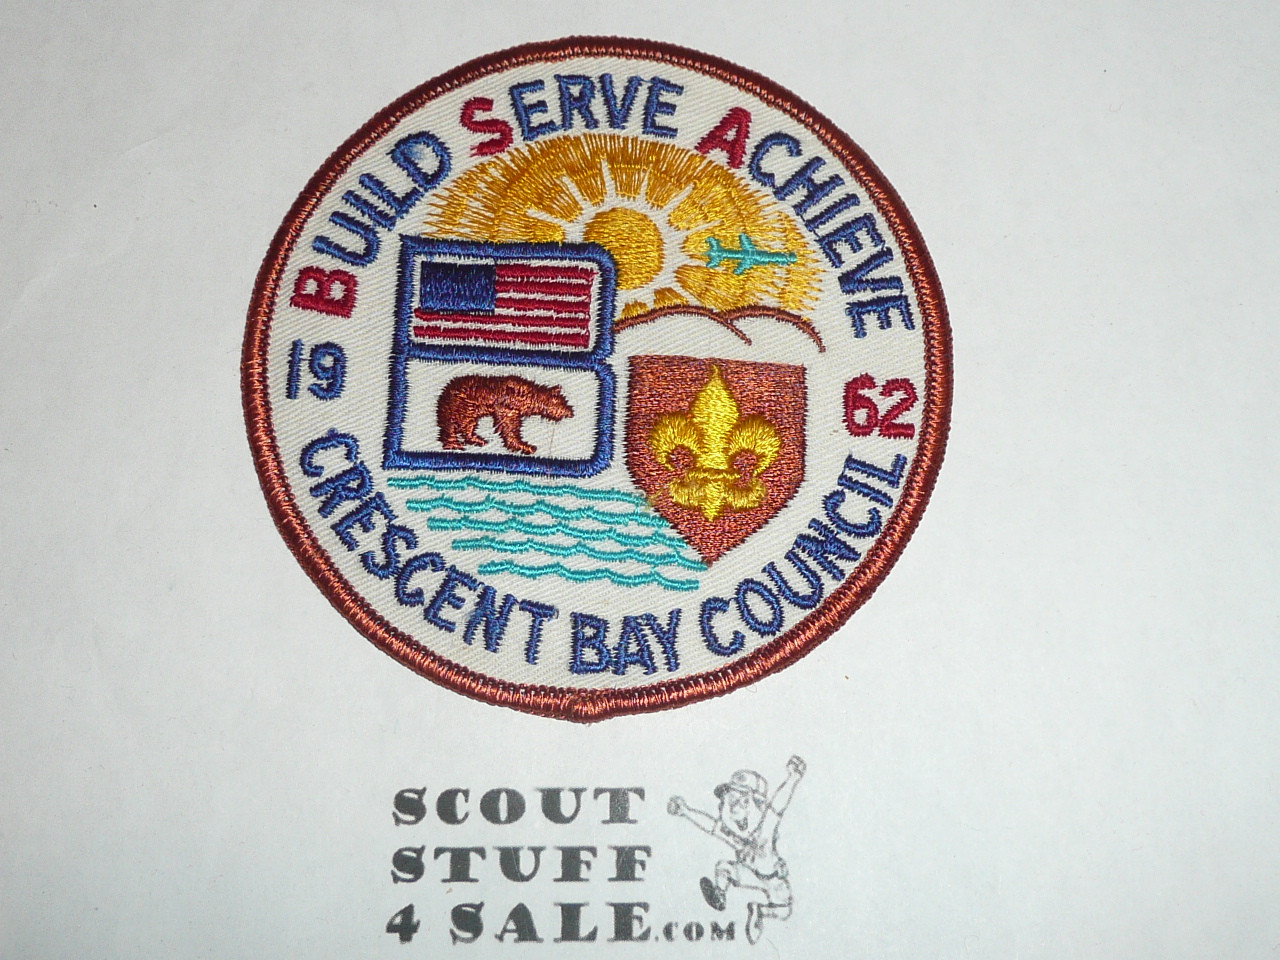 Crescent Bay Area Council, 1962 Scout-o-rama Patch